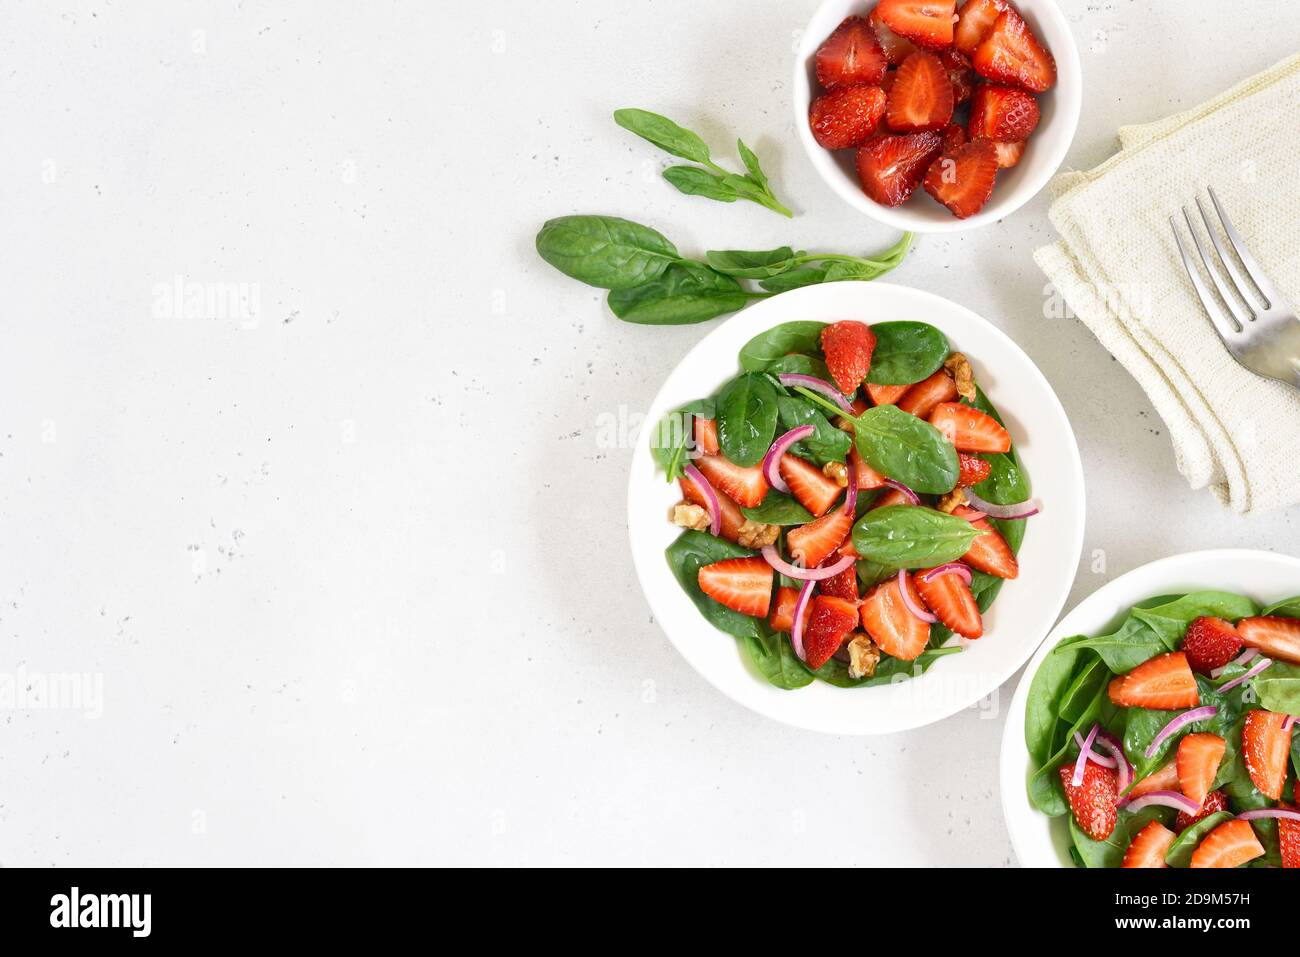 Fruit salad with strawberry, basil and walnut on light background with copy space. Fresh strawberries slices in  bowl. Top view, flat lay. Stock Photo